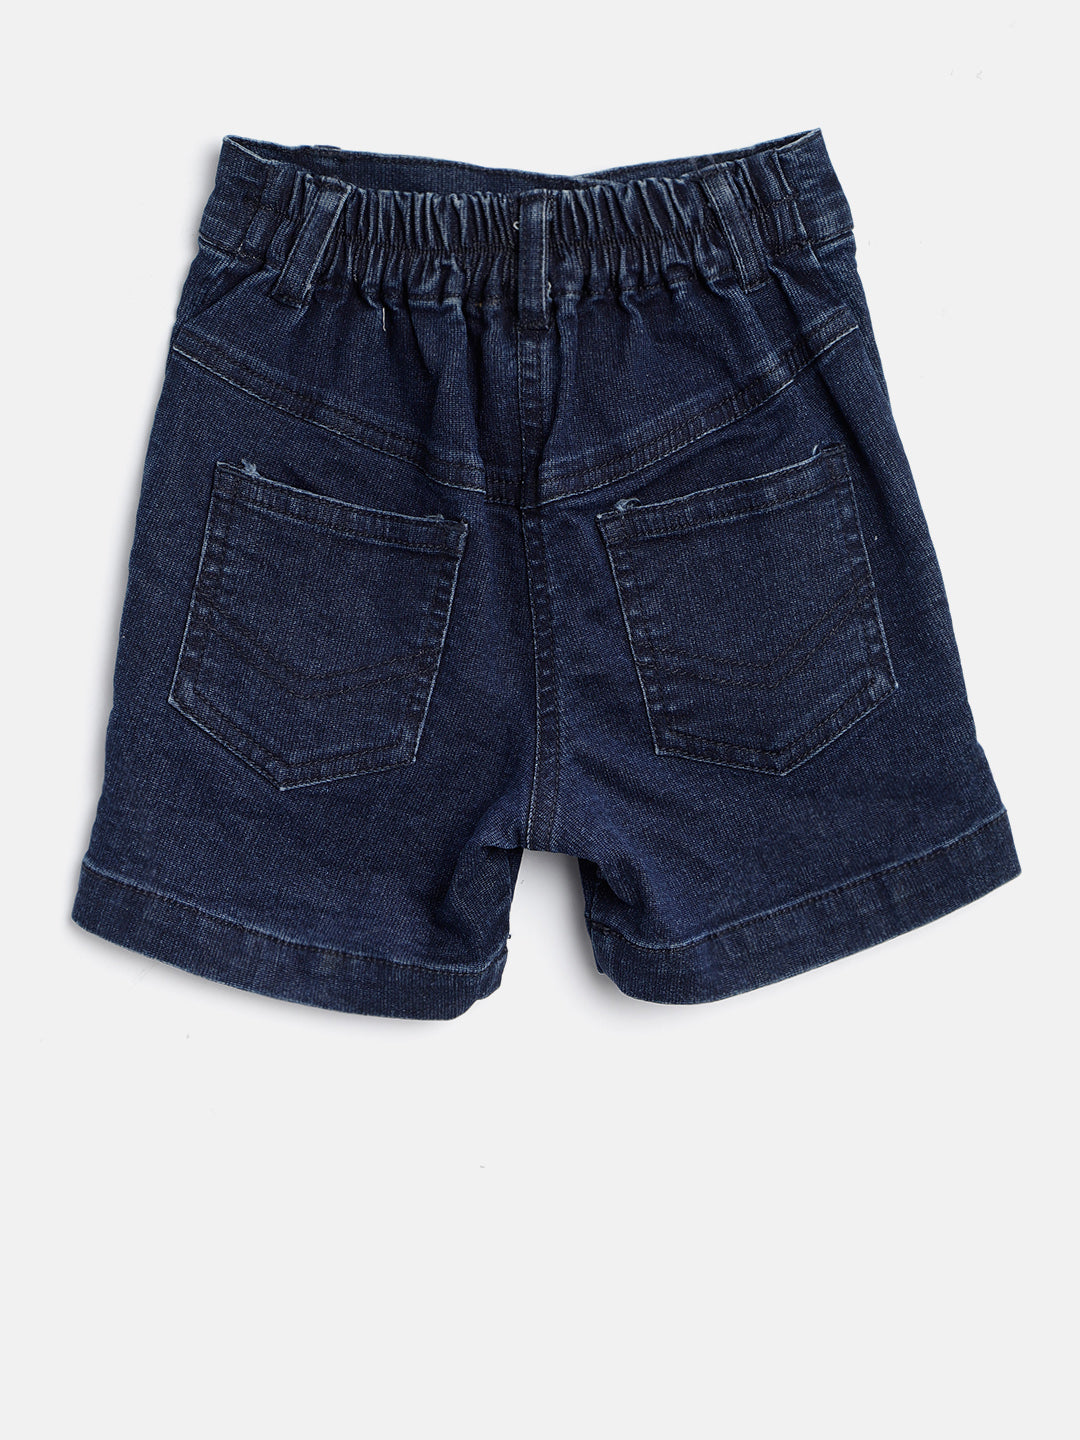 Girls Denim Washed Shorts with Scratch Effect